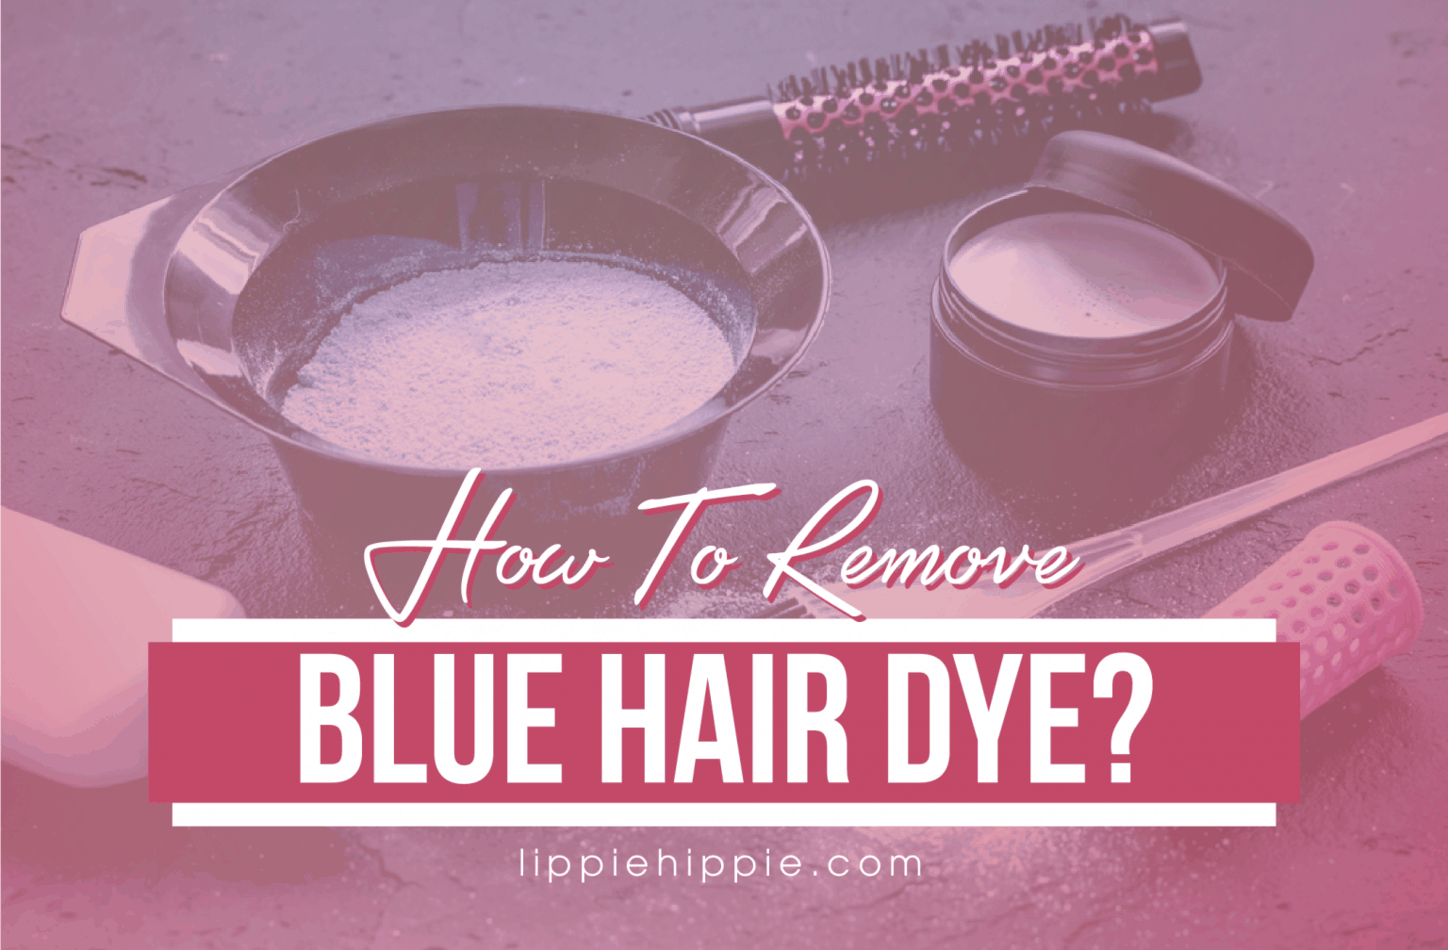 1. How to Remove Blue Hair Dye - wide 7